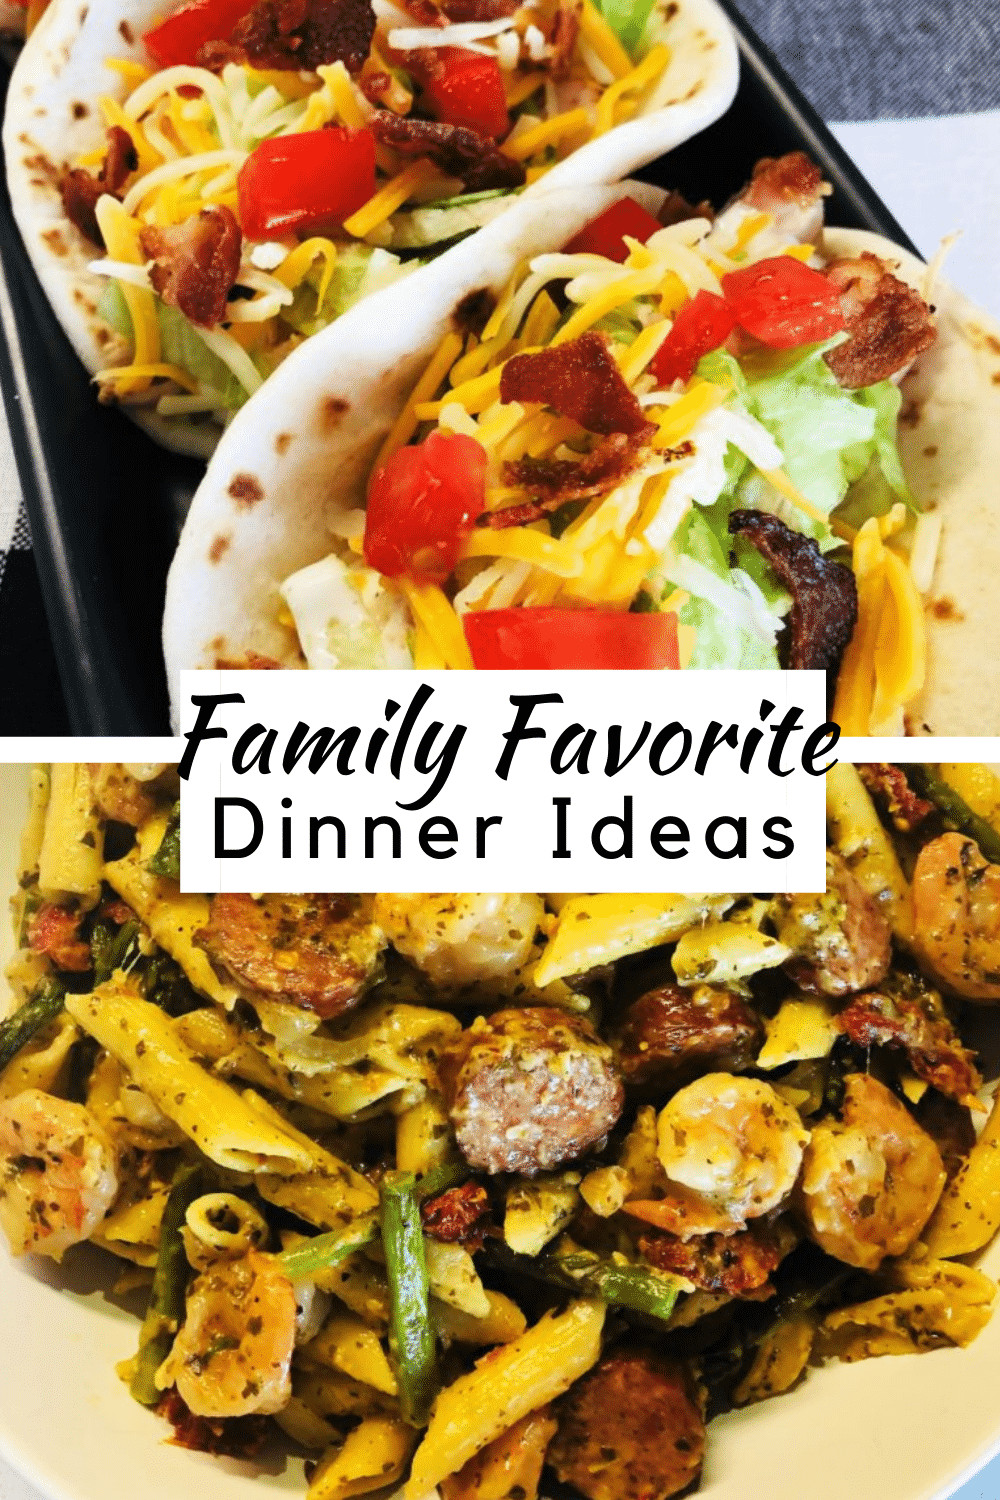 Kids Favorite Dinners Unique Family Favorite Dinners Cooks Well with Others